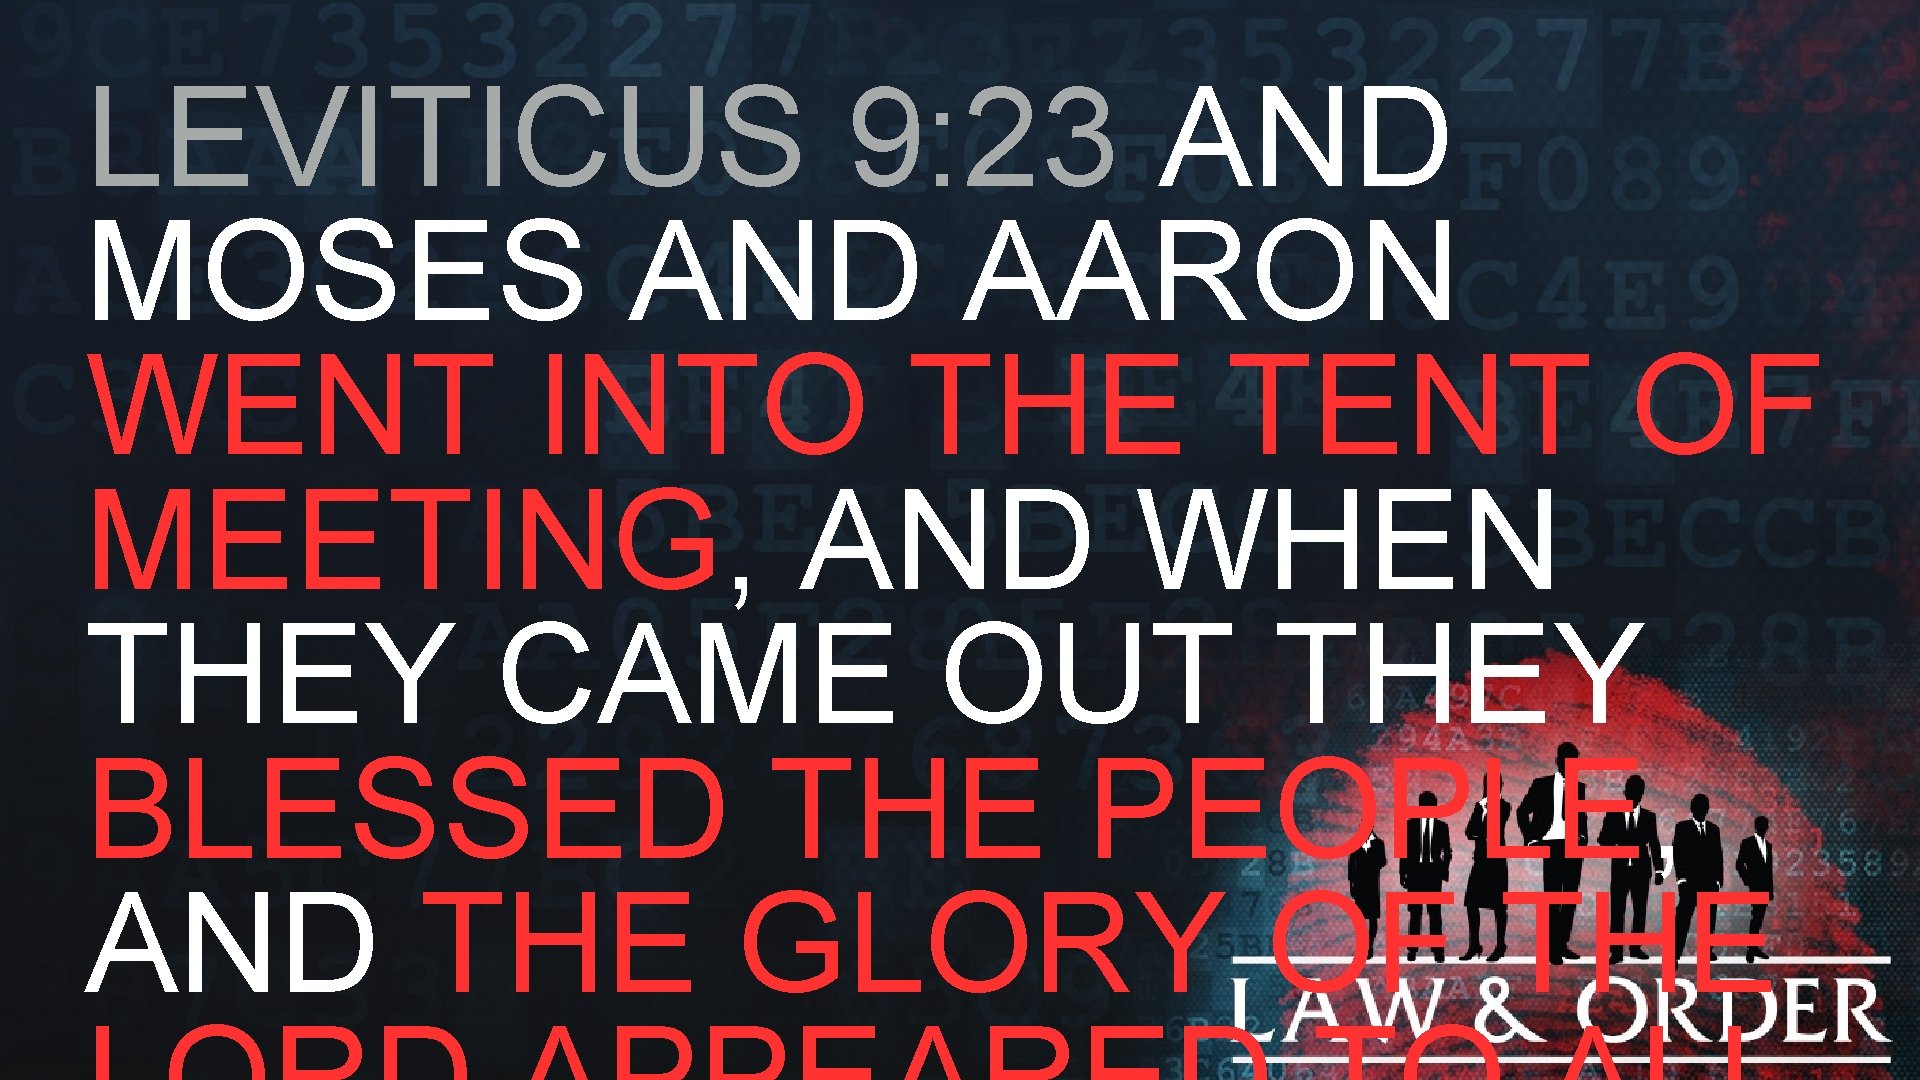 LEVITICUS 9: 23 AND MOSES AND AARON WENT INTO THE TENT OF MEETING, AND